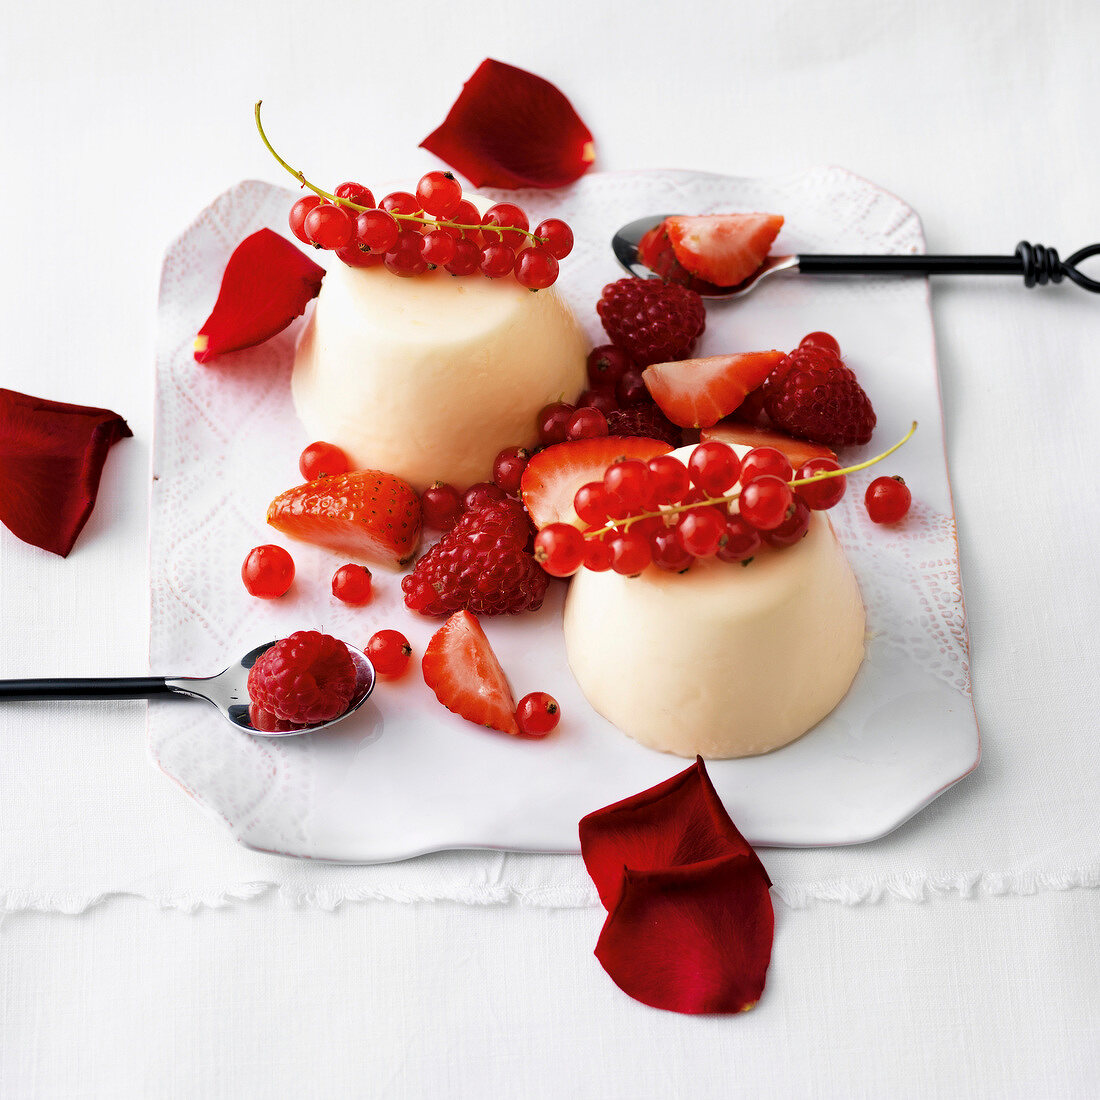 Panna cotta with rose scent and red berries